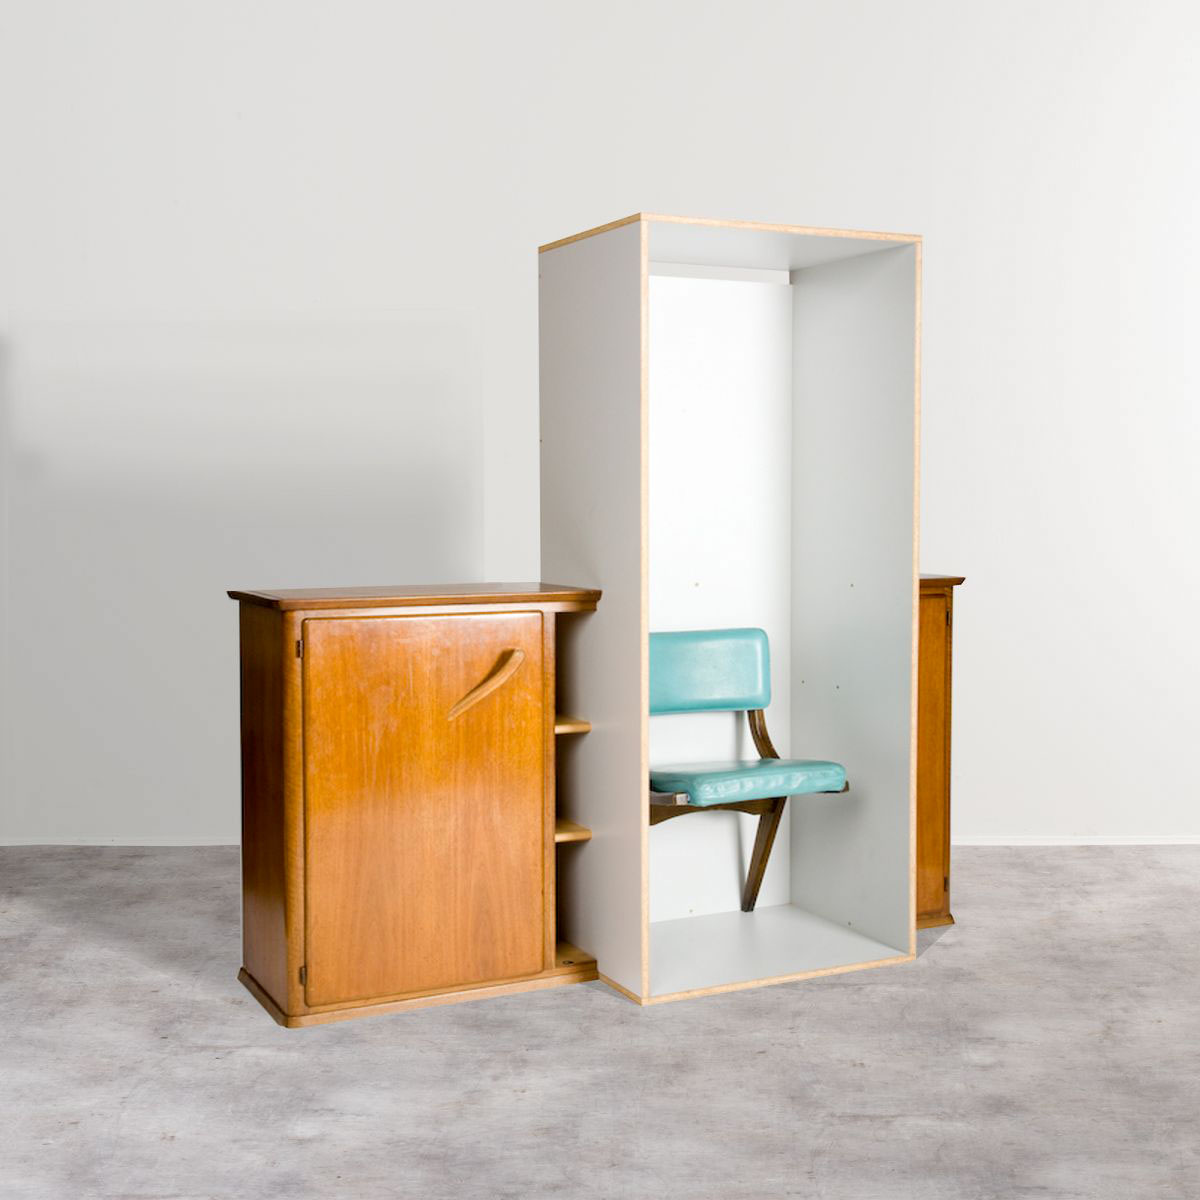 Set cupboard with chair 'Somerset House/Chair into Cabinet' Martino Gamper pic-1